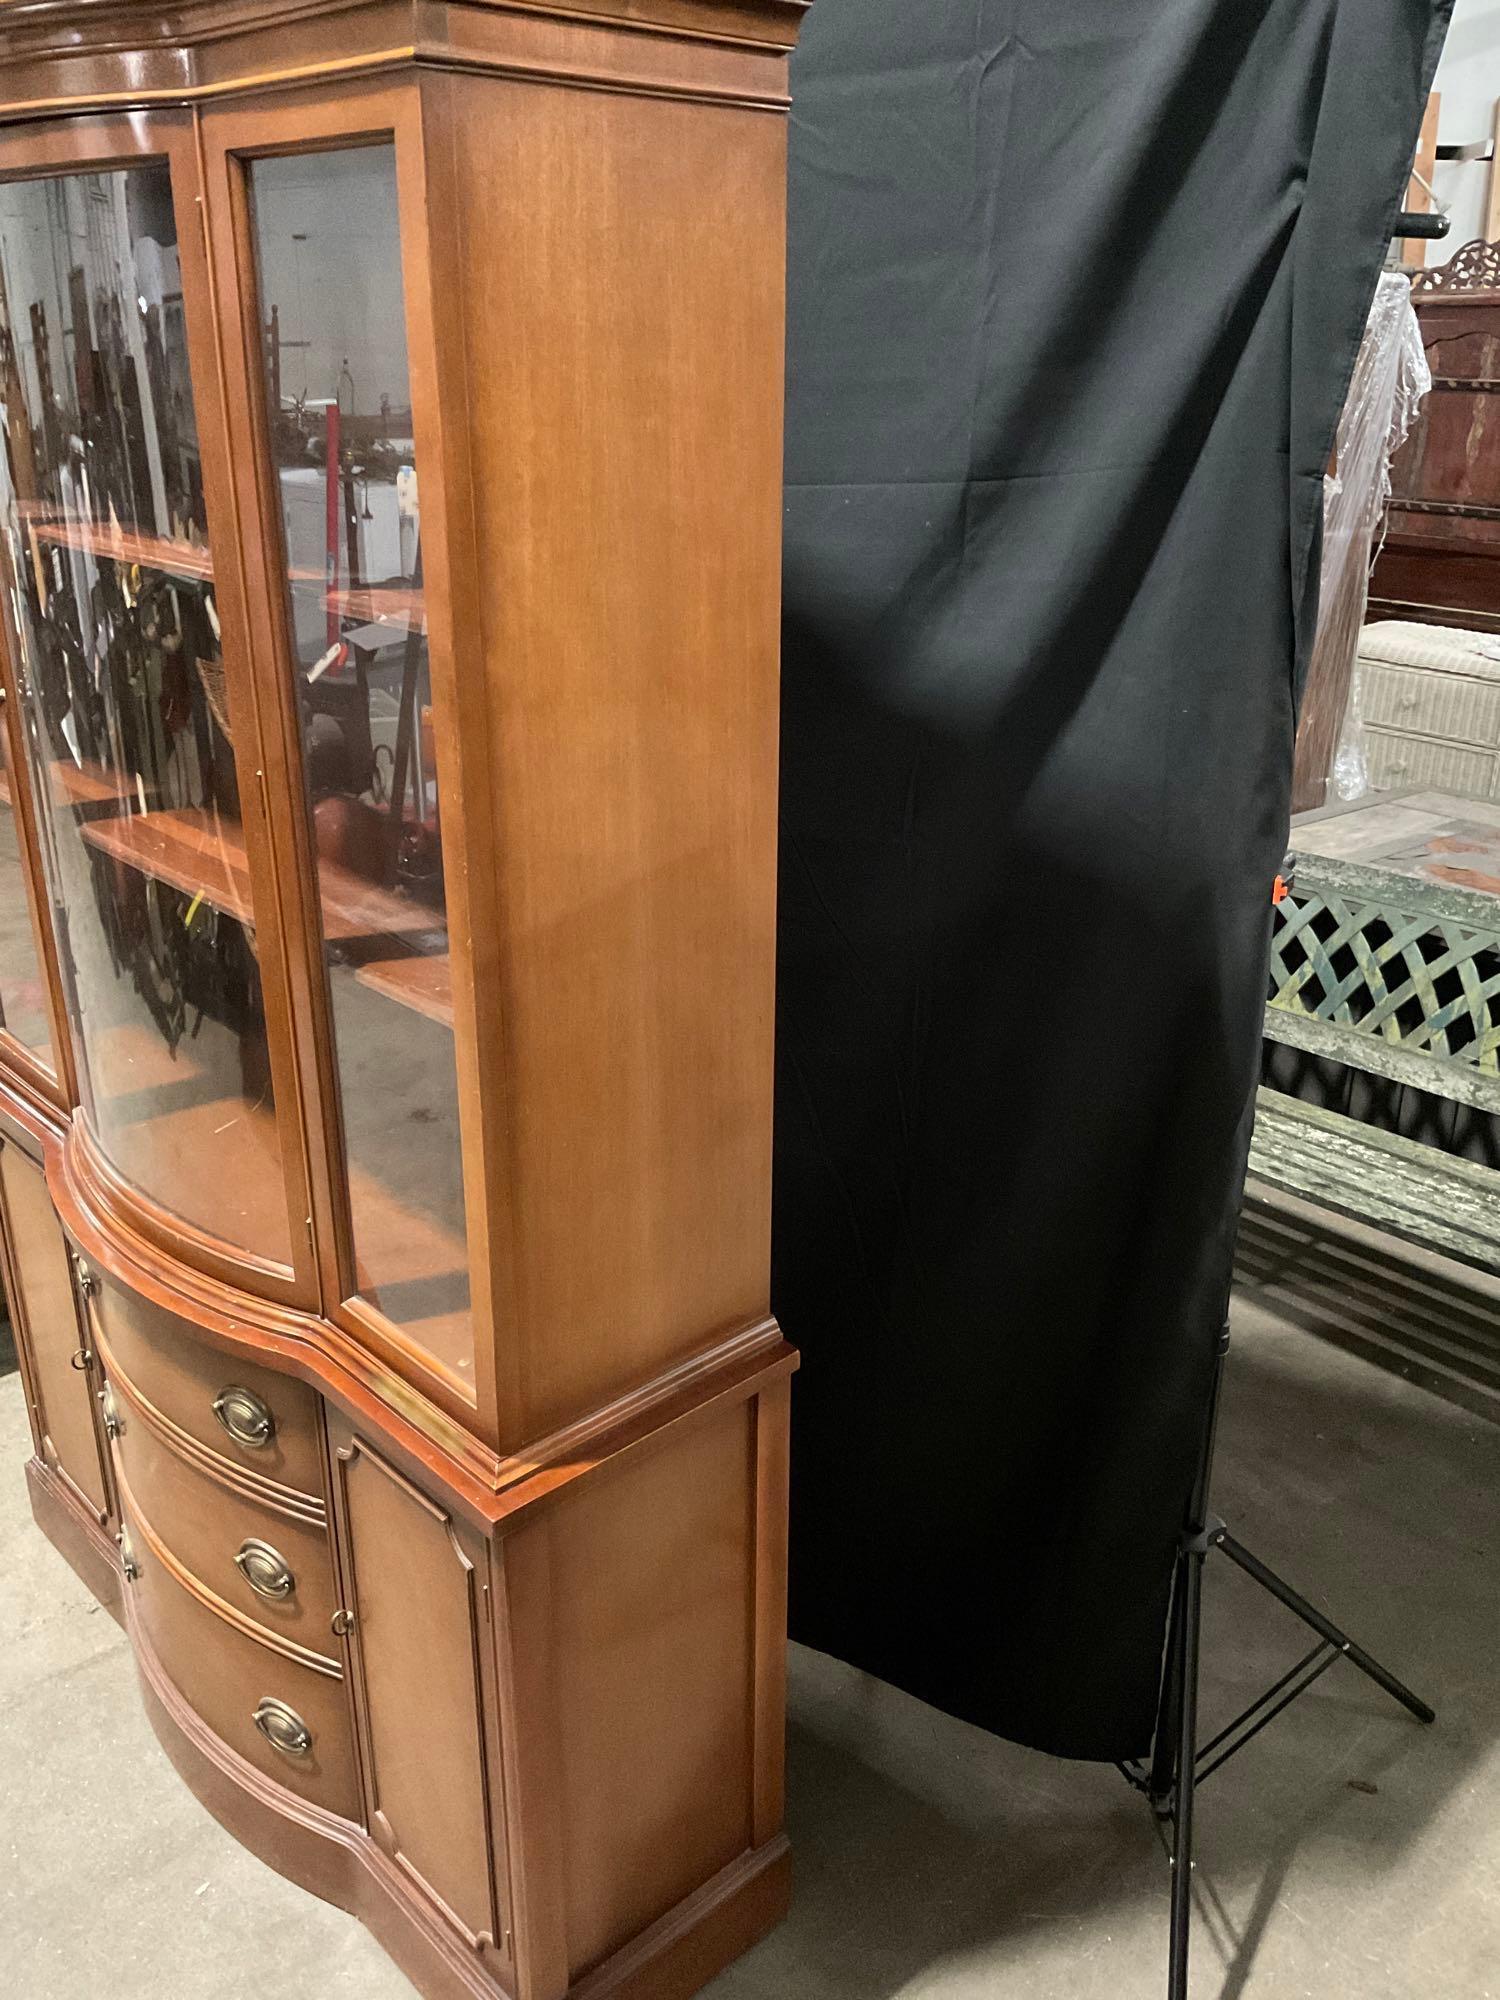 Vintage serpentine front, maple and glass hutch with original hardware - Fair condition